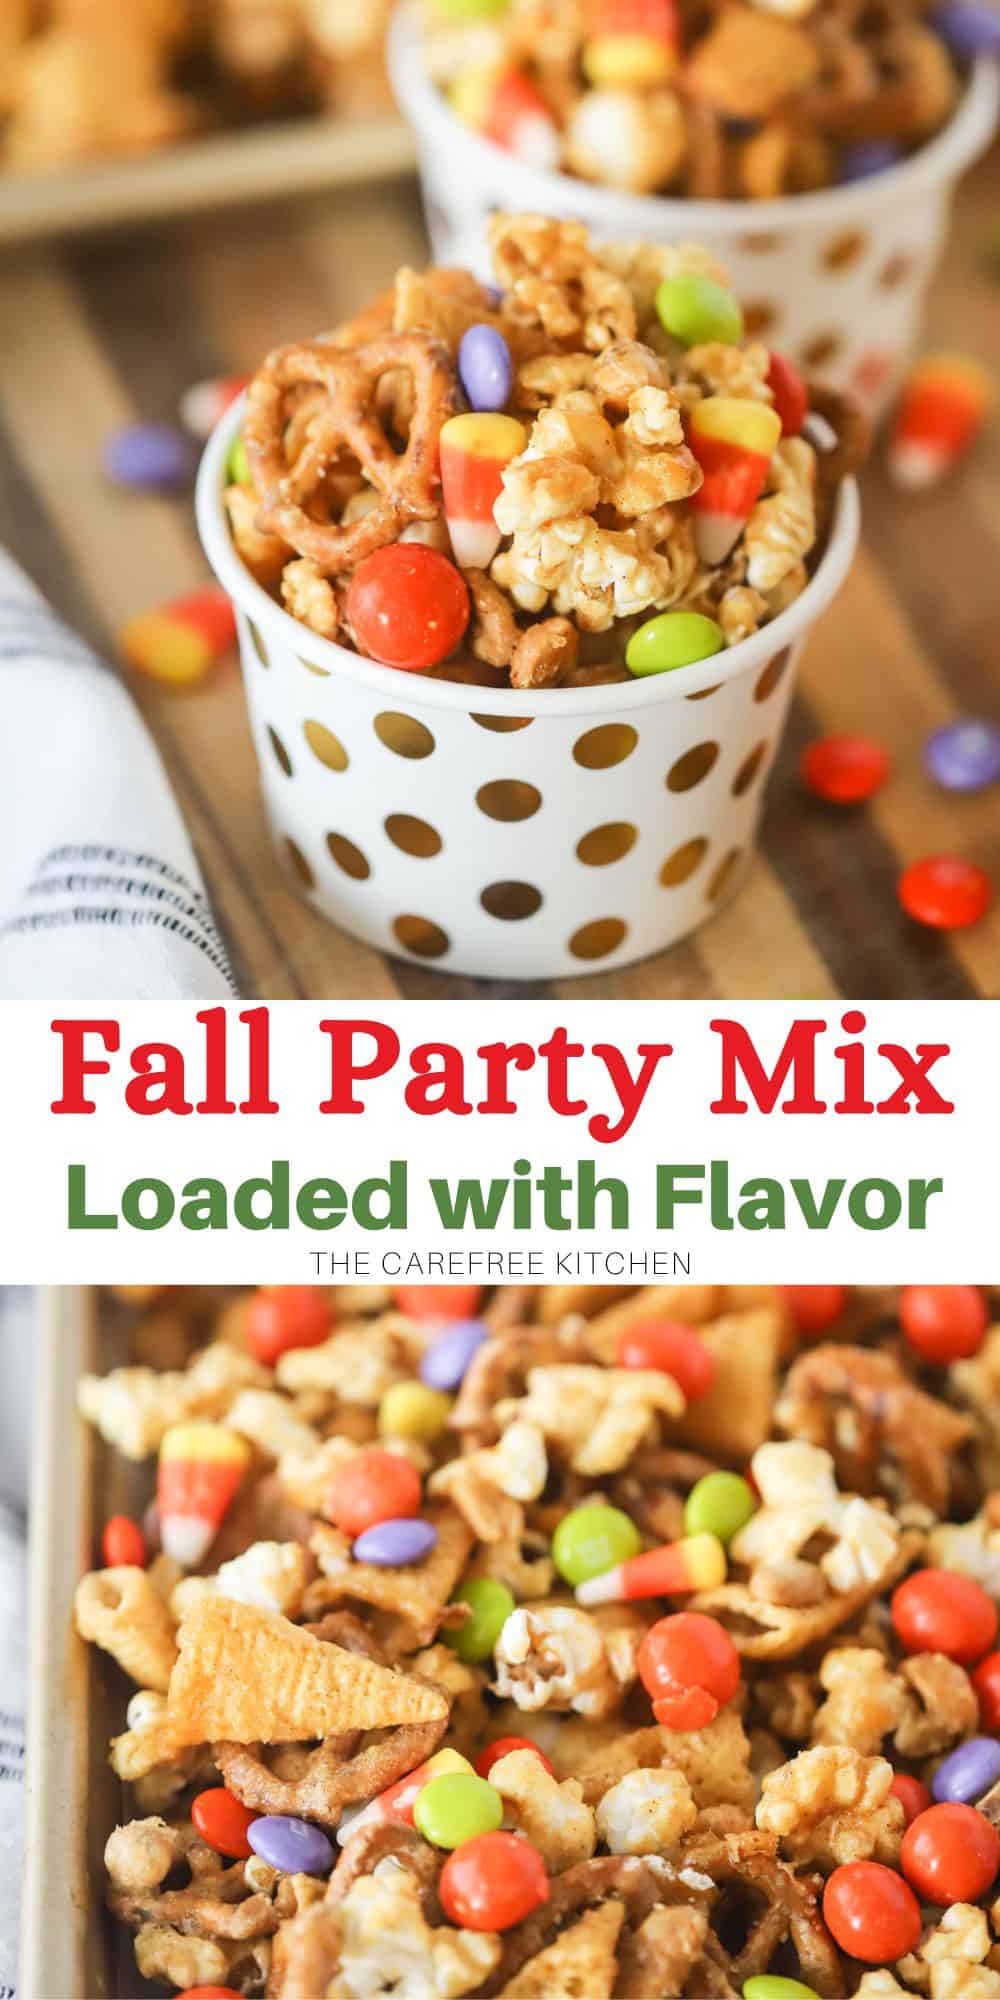 Fall Snack Mix - The Carefree Kitchen